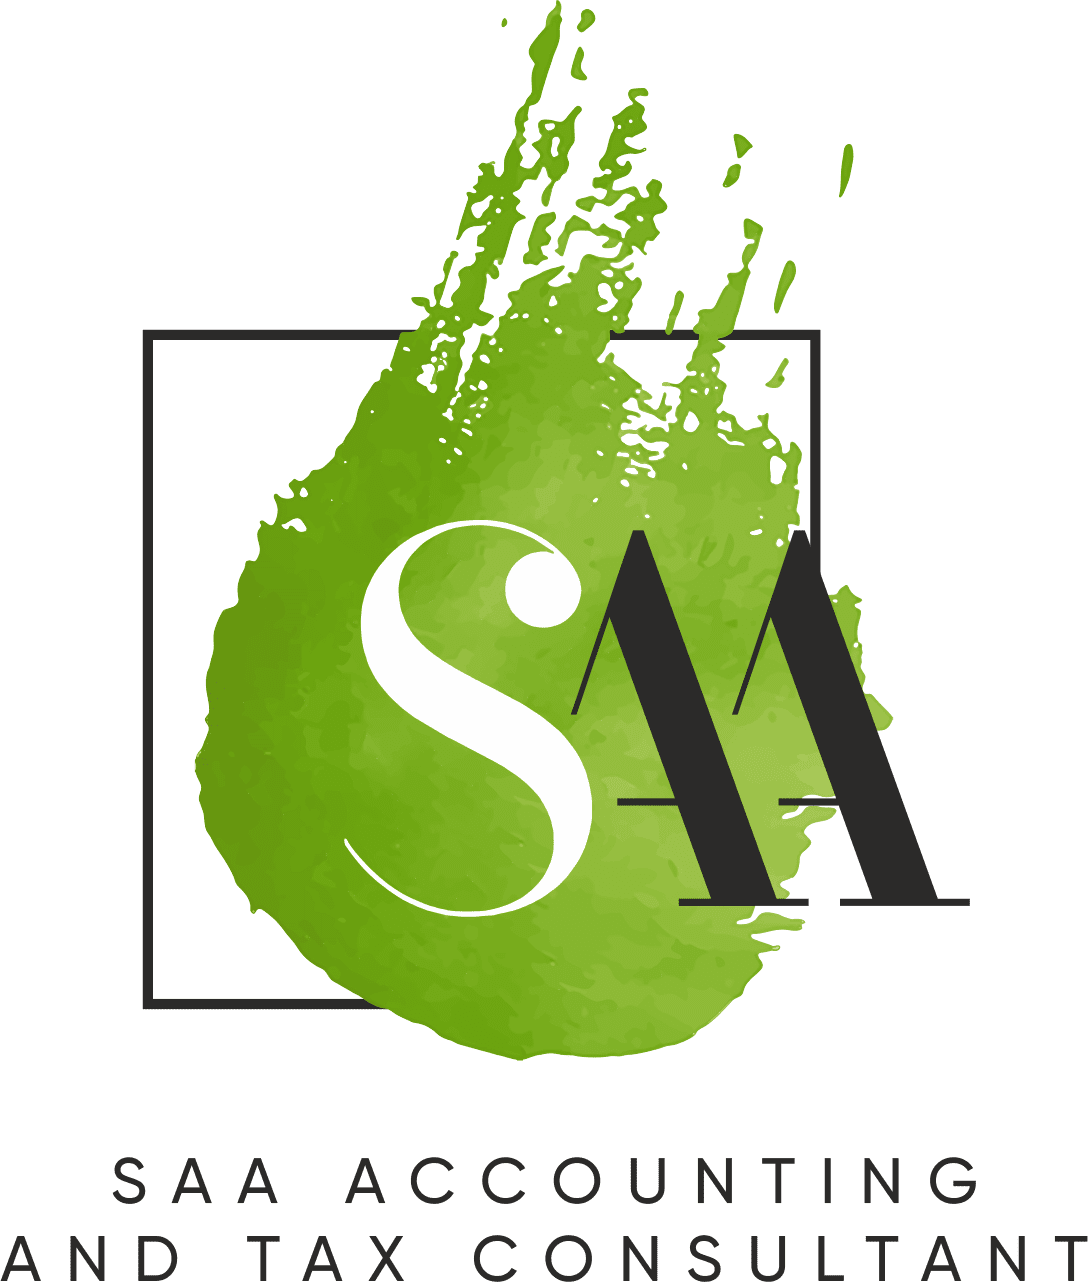 SAA Accounting and Tax Consultants